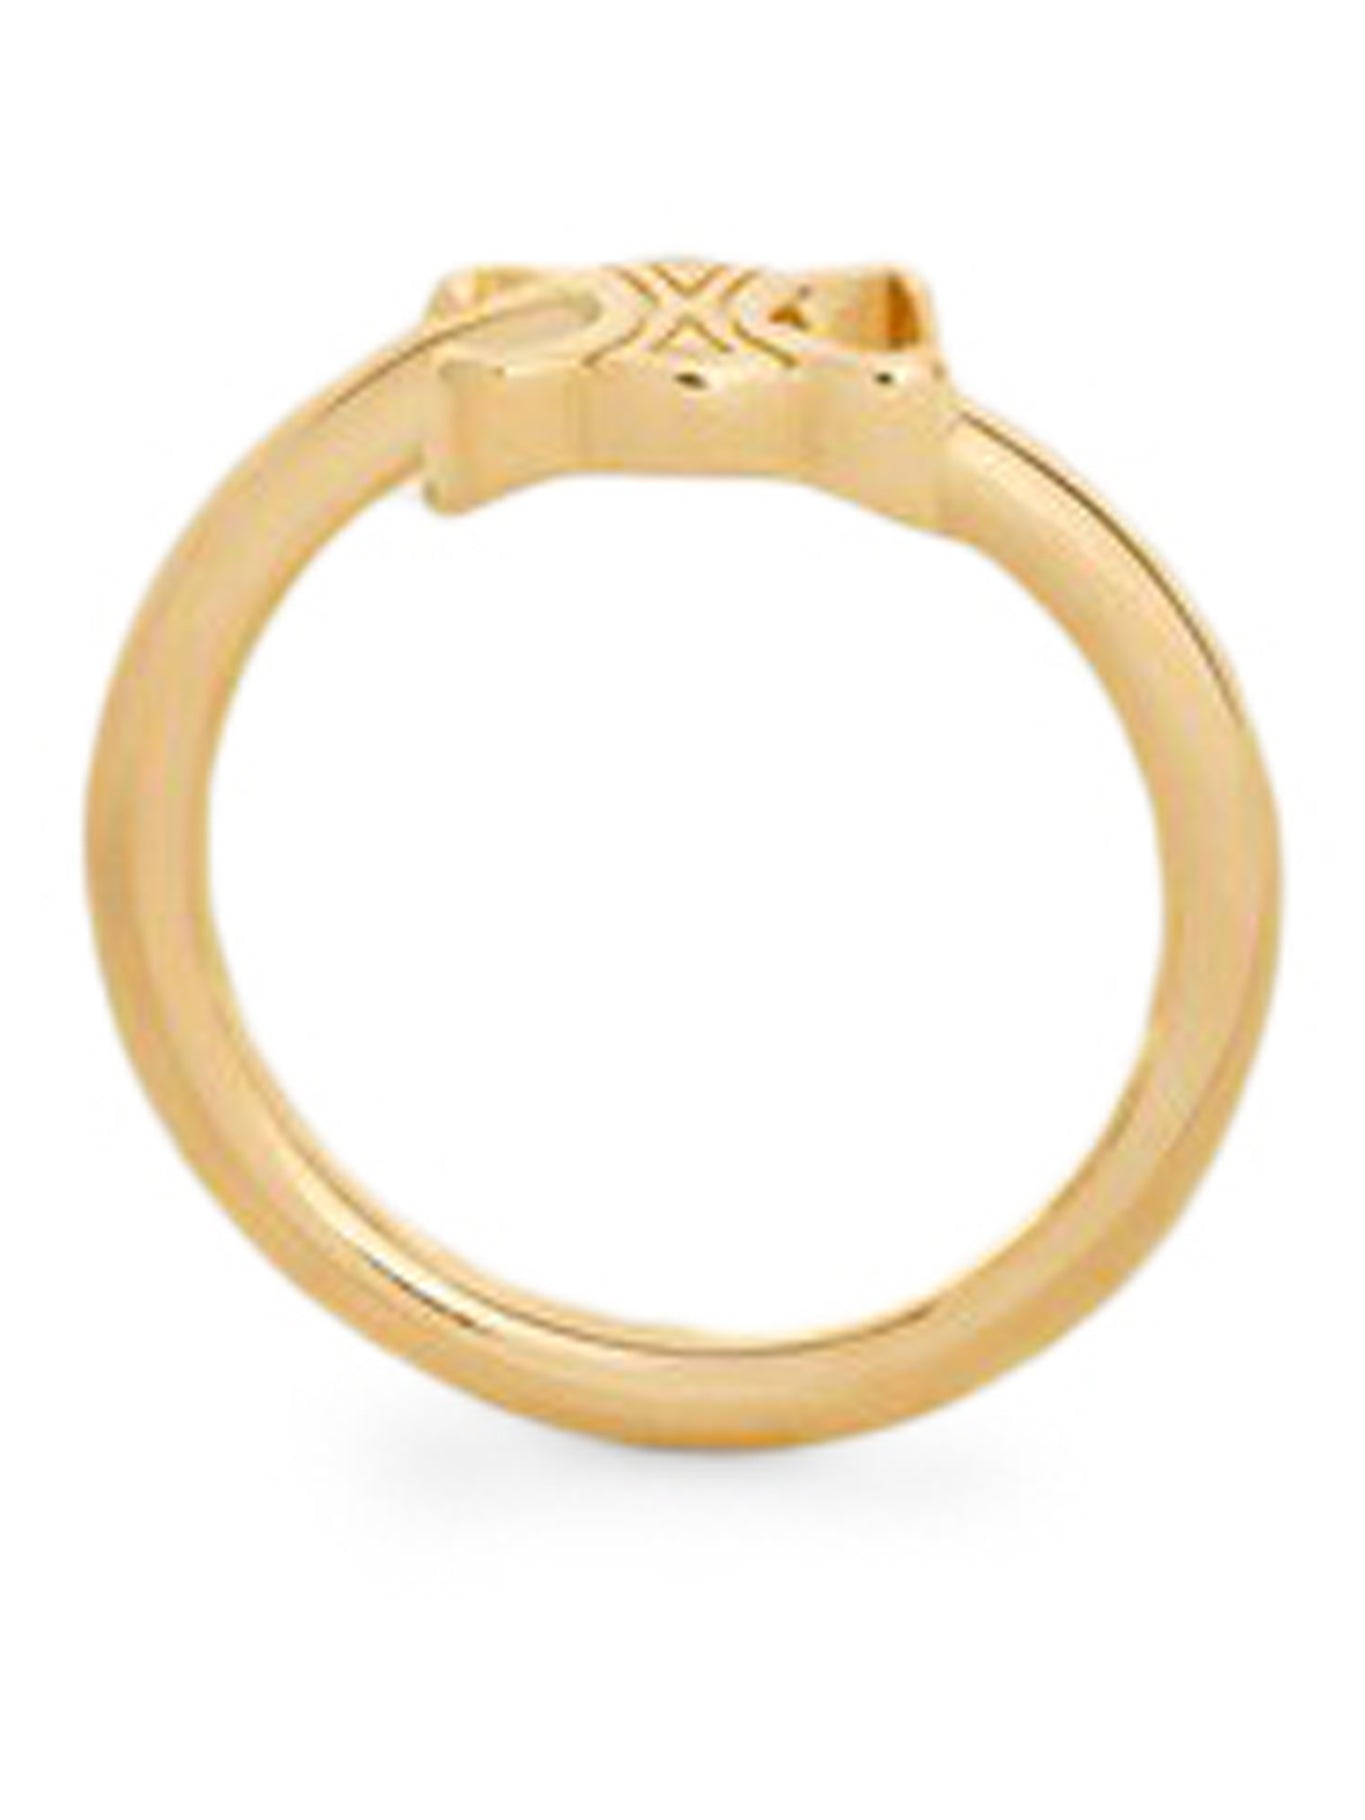 TRIOMPHE ASYMMETRIC RING IN GOLD BRASS GOLD FINISH